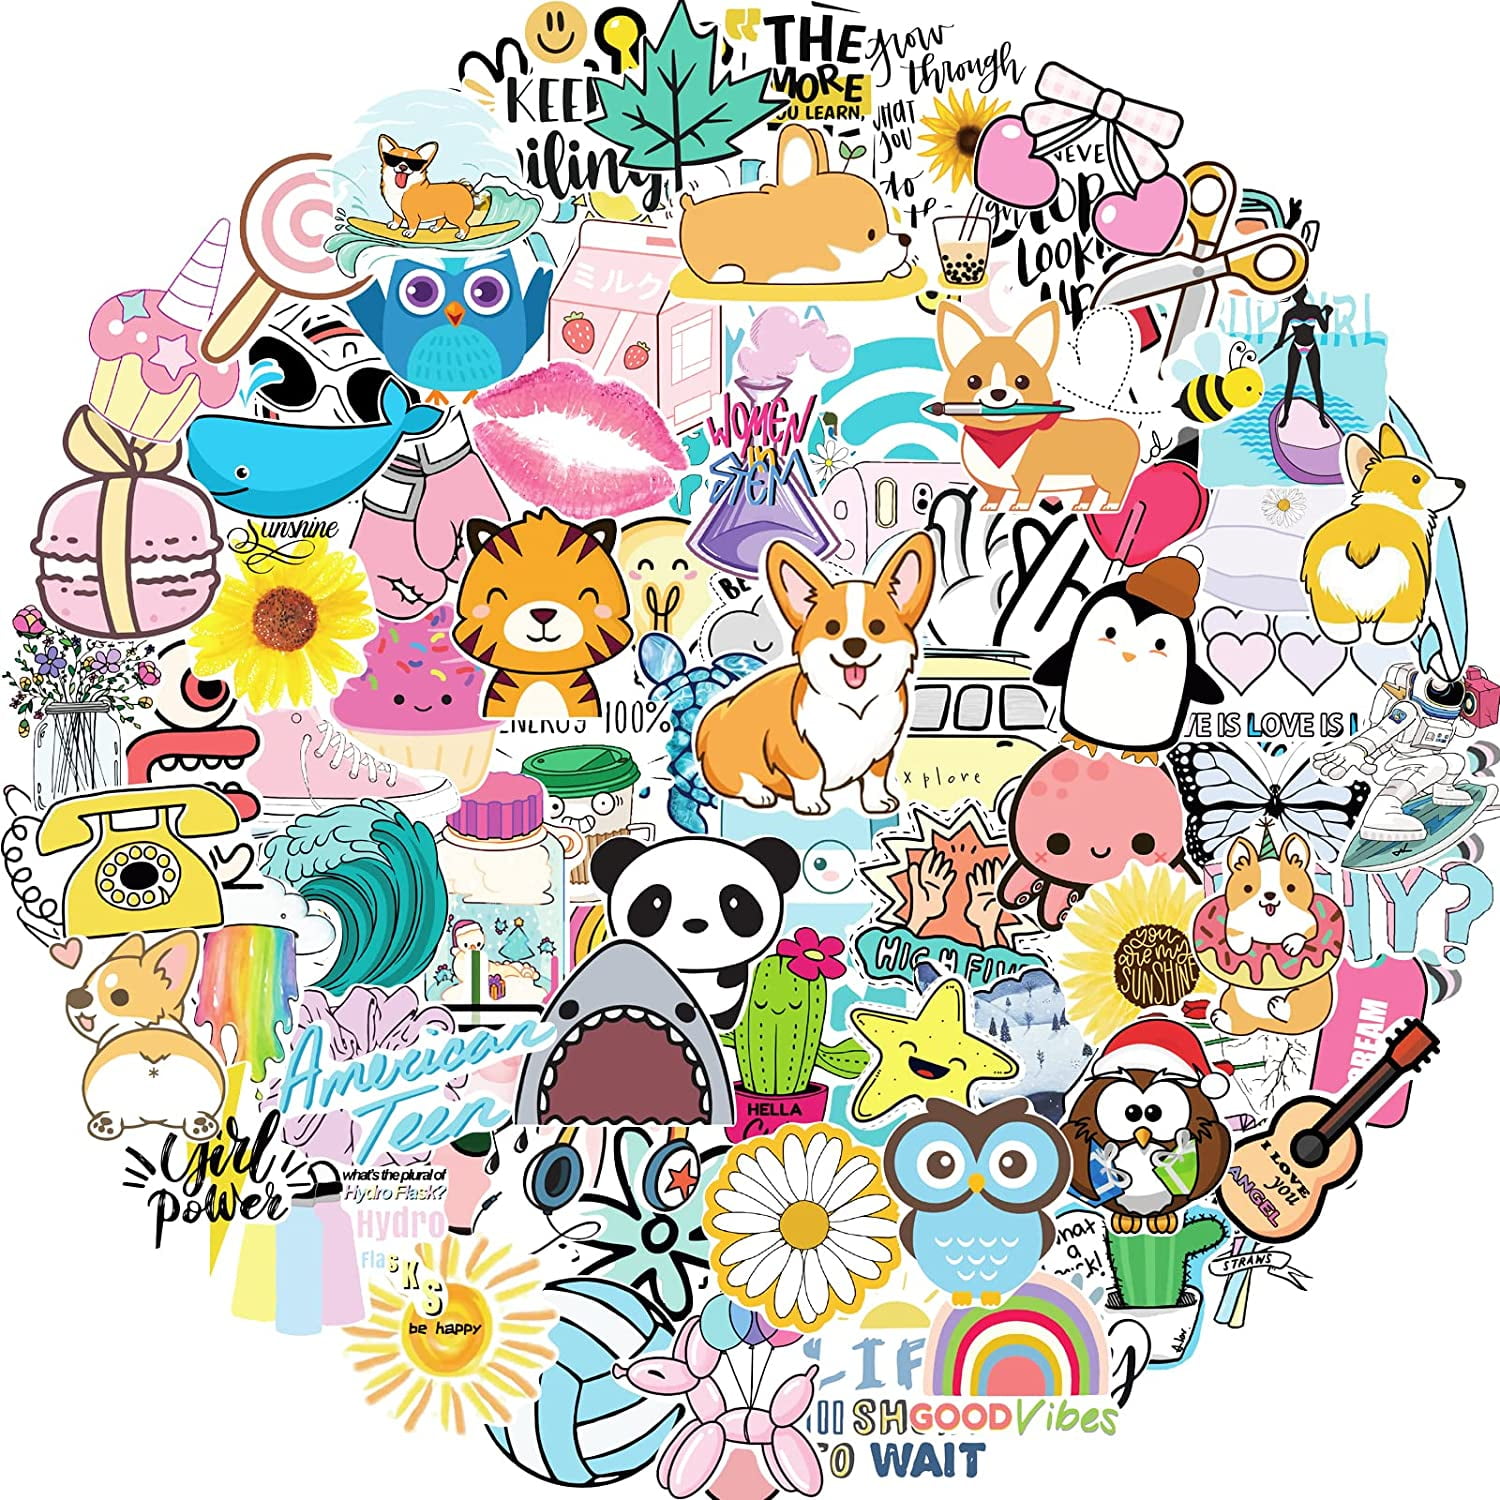 800 Pcs Cute Stickers for Teens Water Bottle Stickers for Kids, Waterproof  Aesthetic Sticker Pack for Laptop Luggage Notebook Skateboard Scrapbook